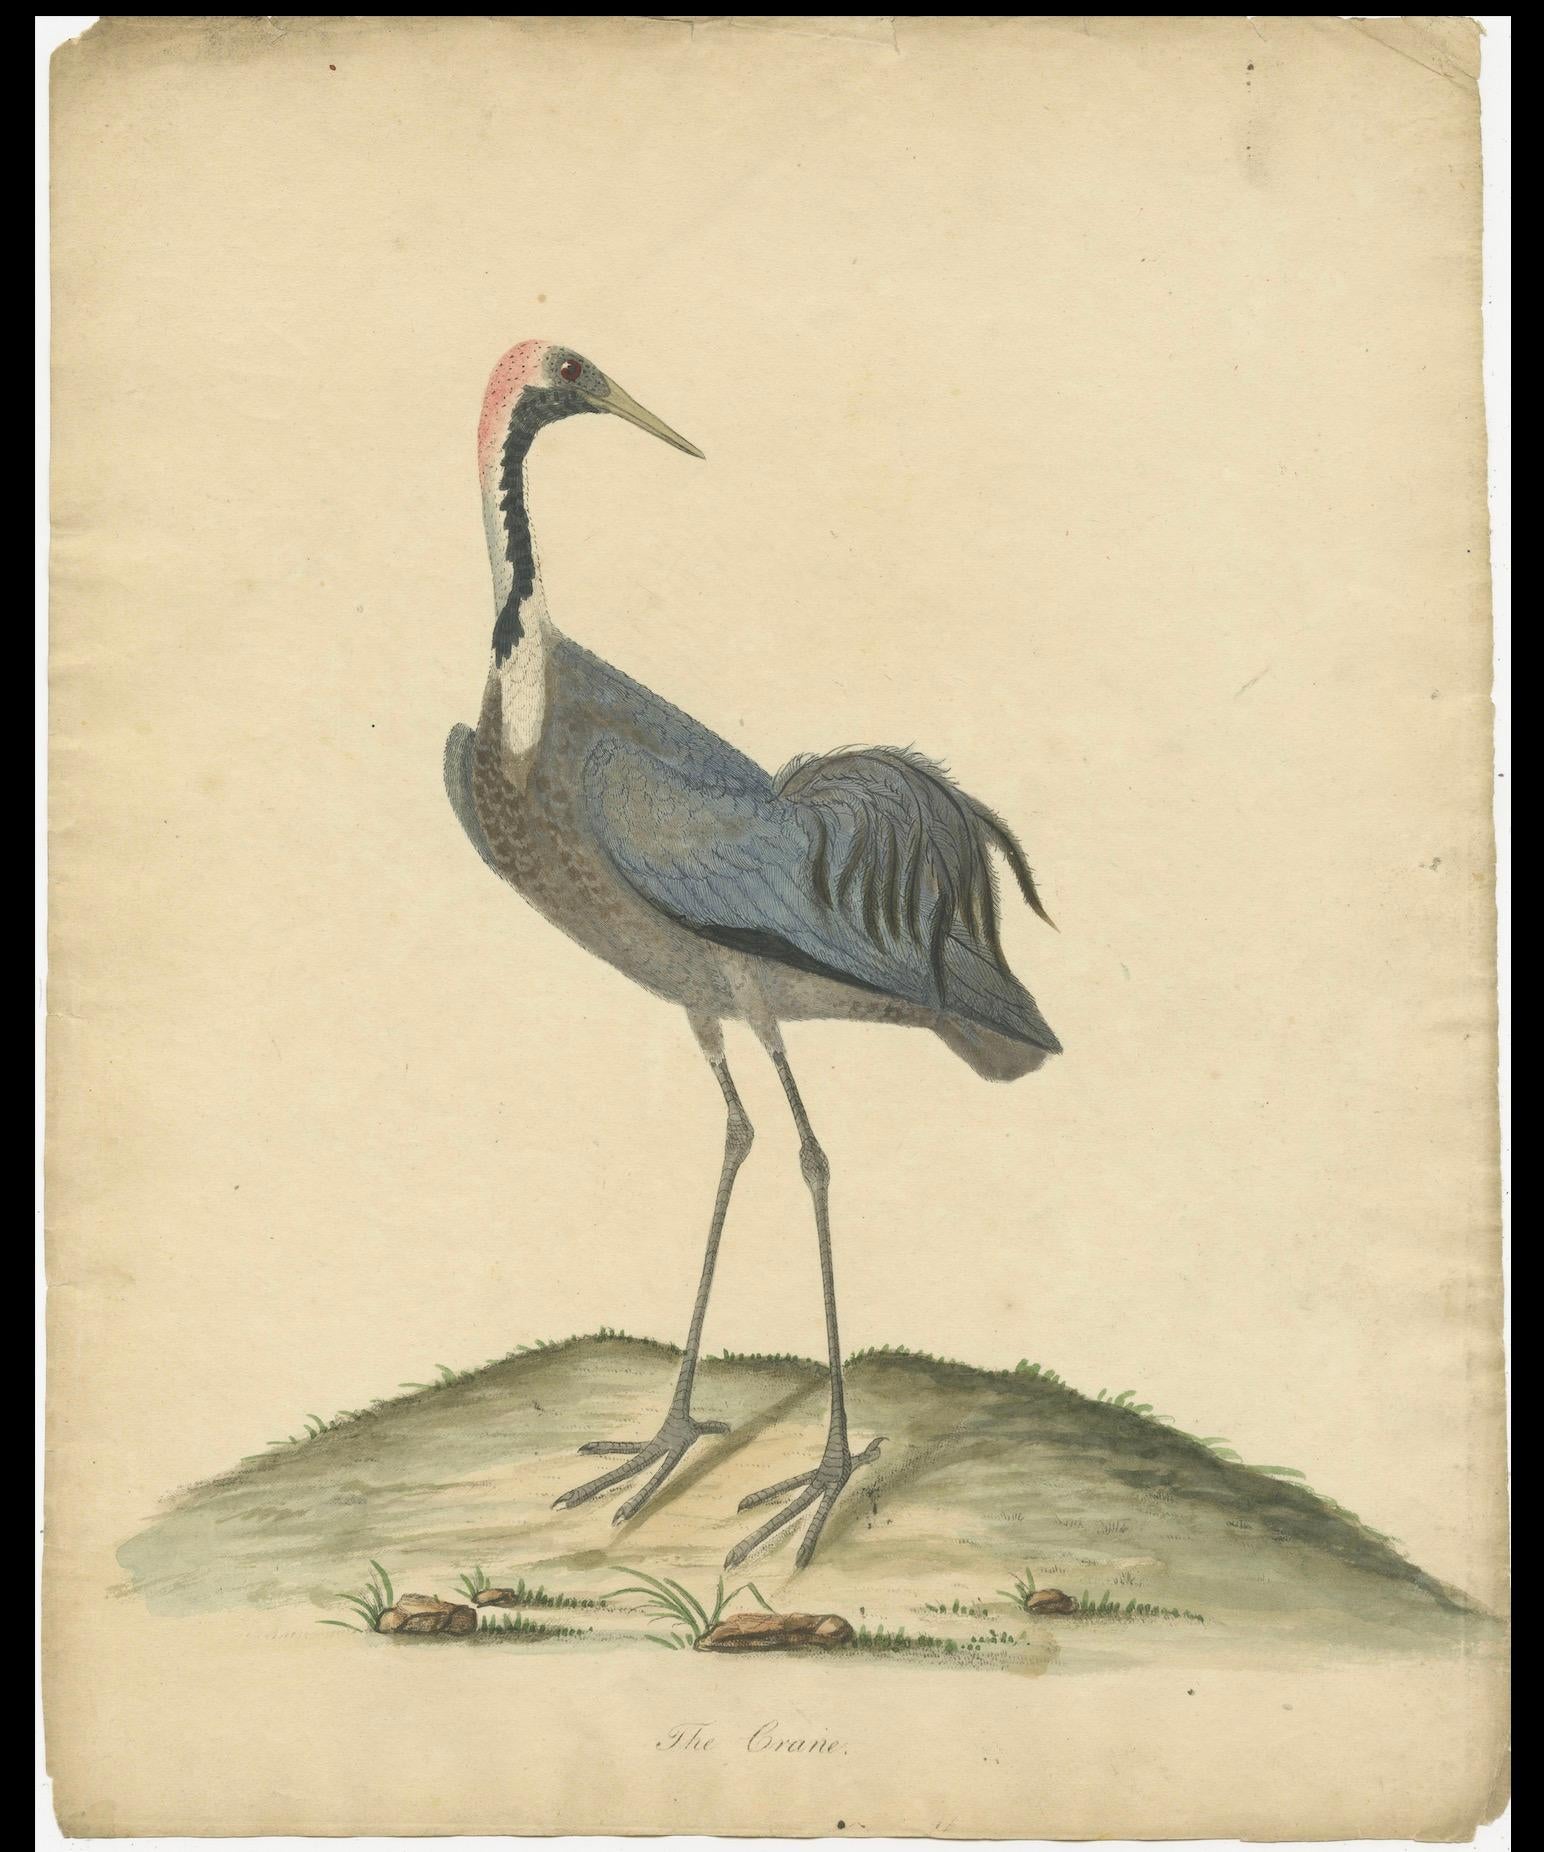 Engraved Original Antique Hand-colored Copperplate Engraving of a Crane, 1794 For Sale